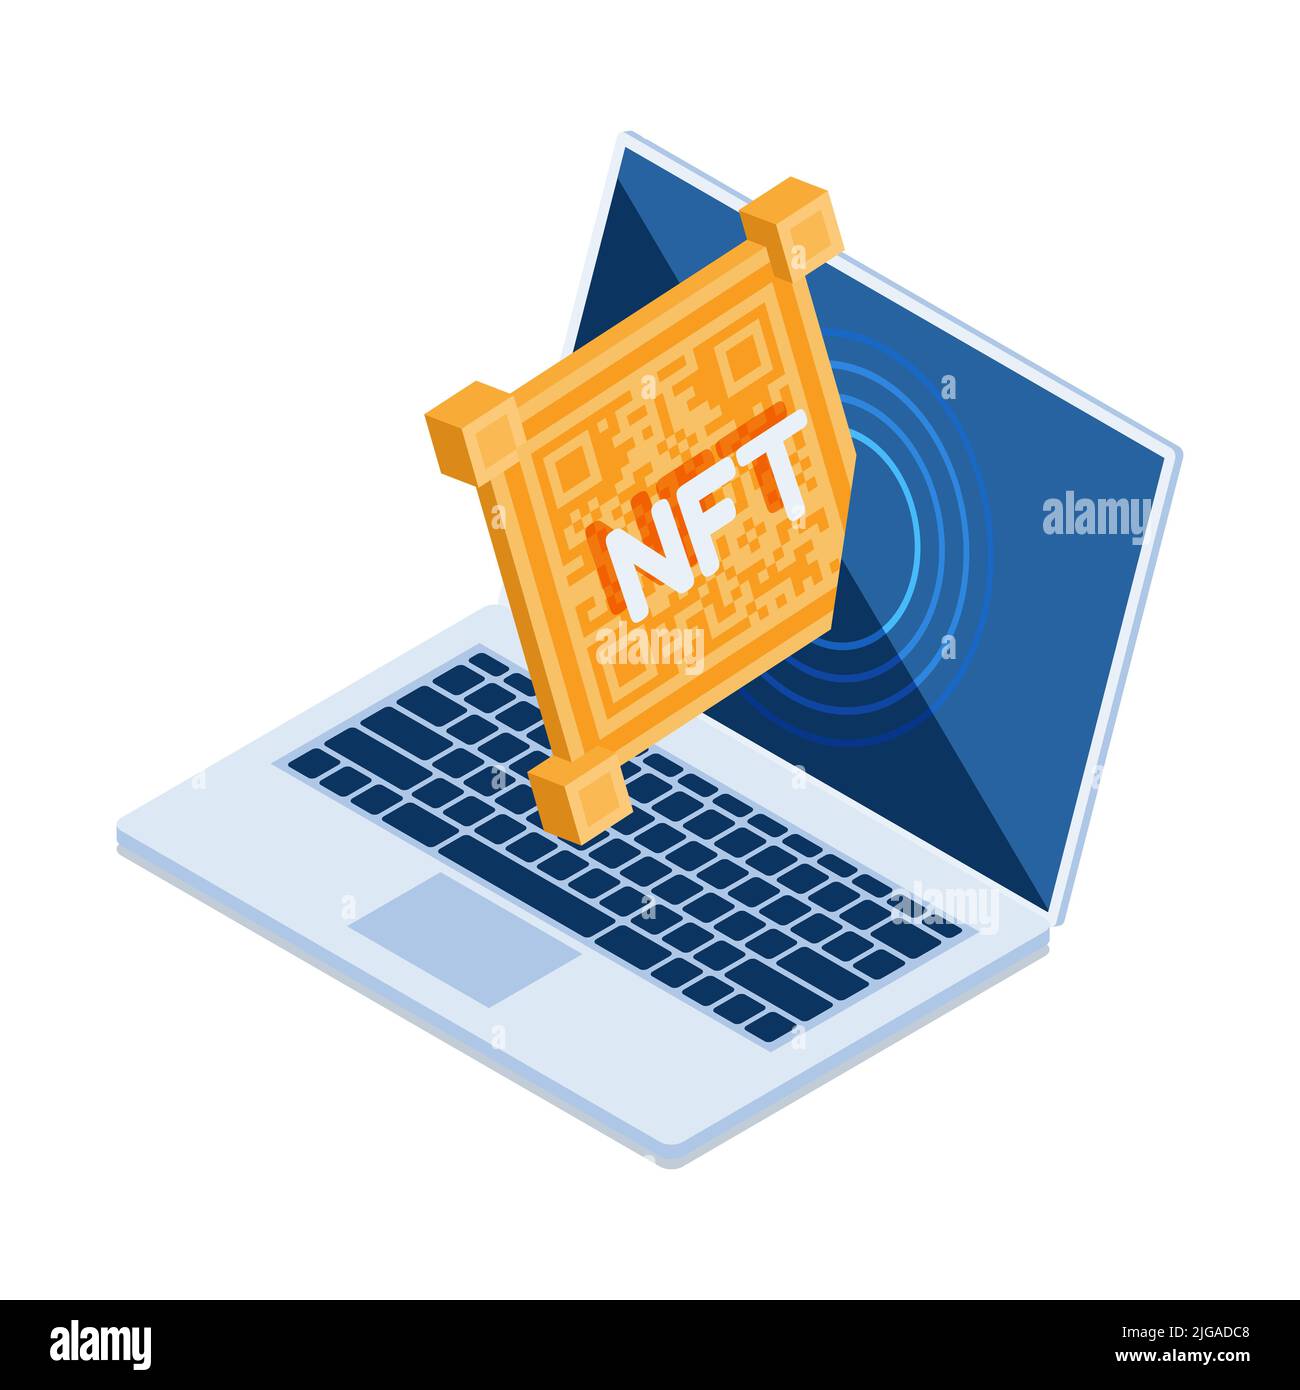 Flat 3d Isometric NFT Art Inside Laptop Monitor. Non Fungible Token or Cryptocurrency Concept. Stock Vector